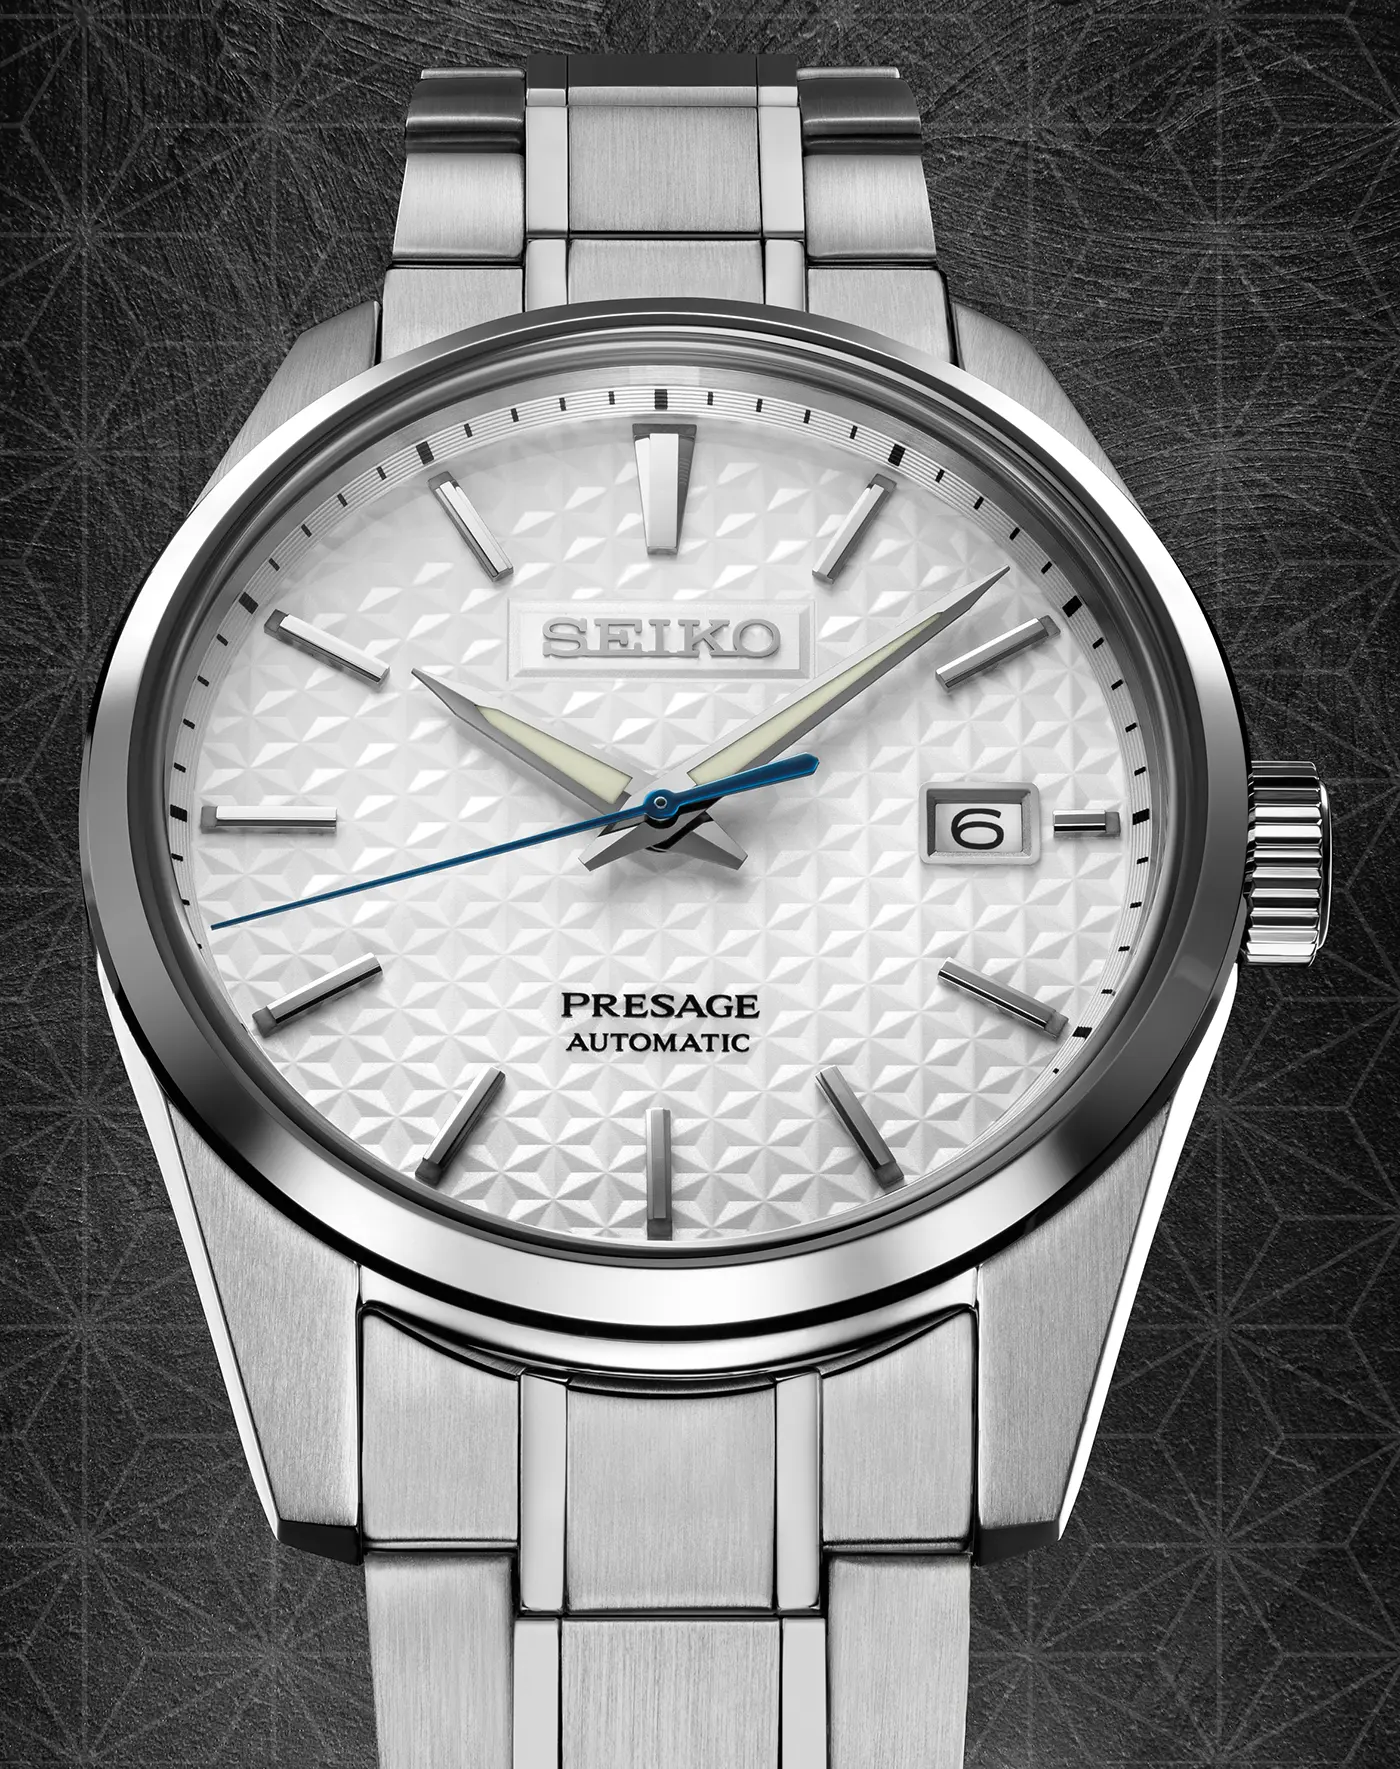 INTRODUCING: The Seiko Presage Sharp Edged Series is yet another  competitively priced collection for dial fetishists - Time and Tide Watches